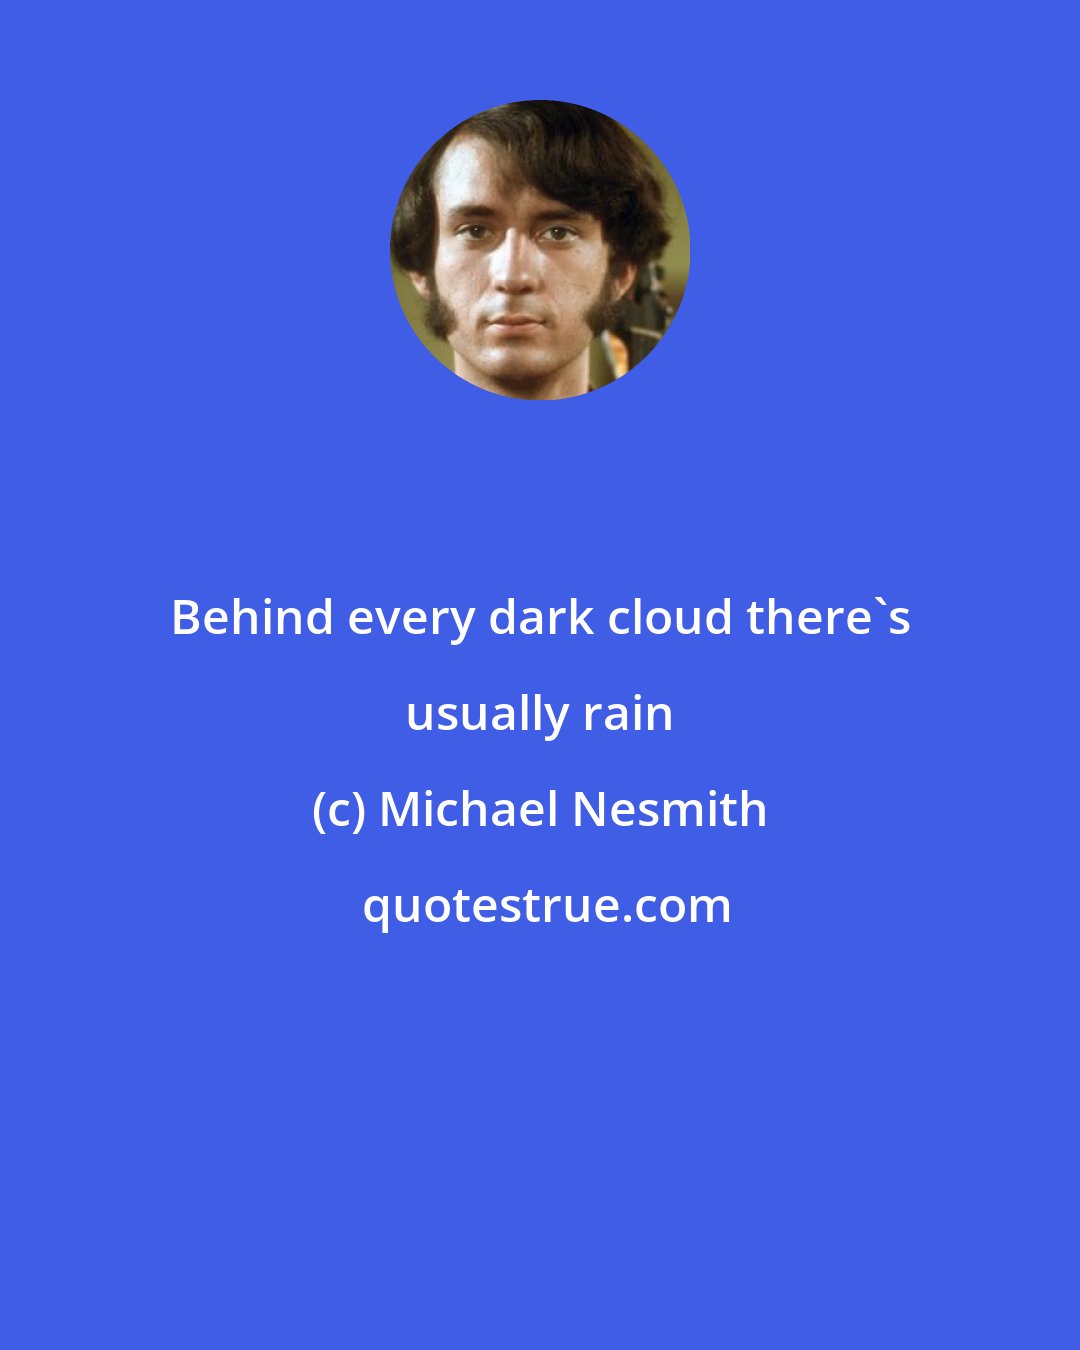 Michael Nesmith: Behind every dark cloud there's usually rain